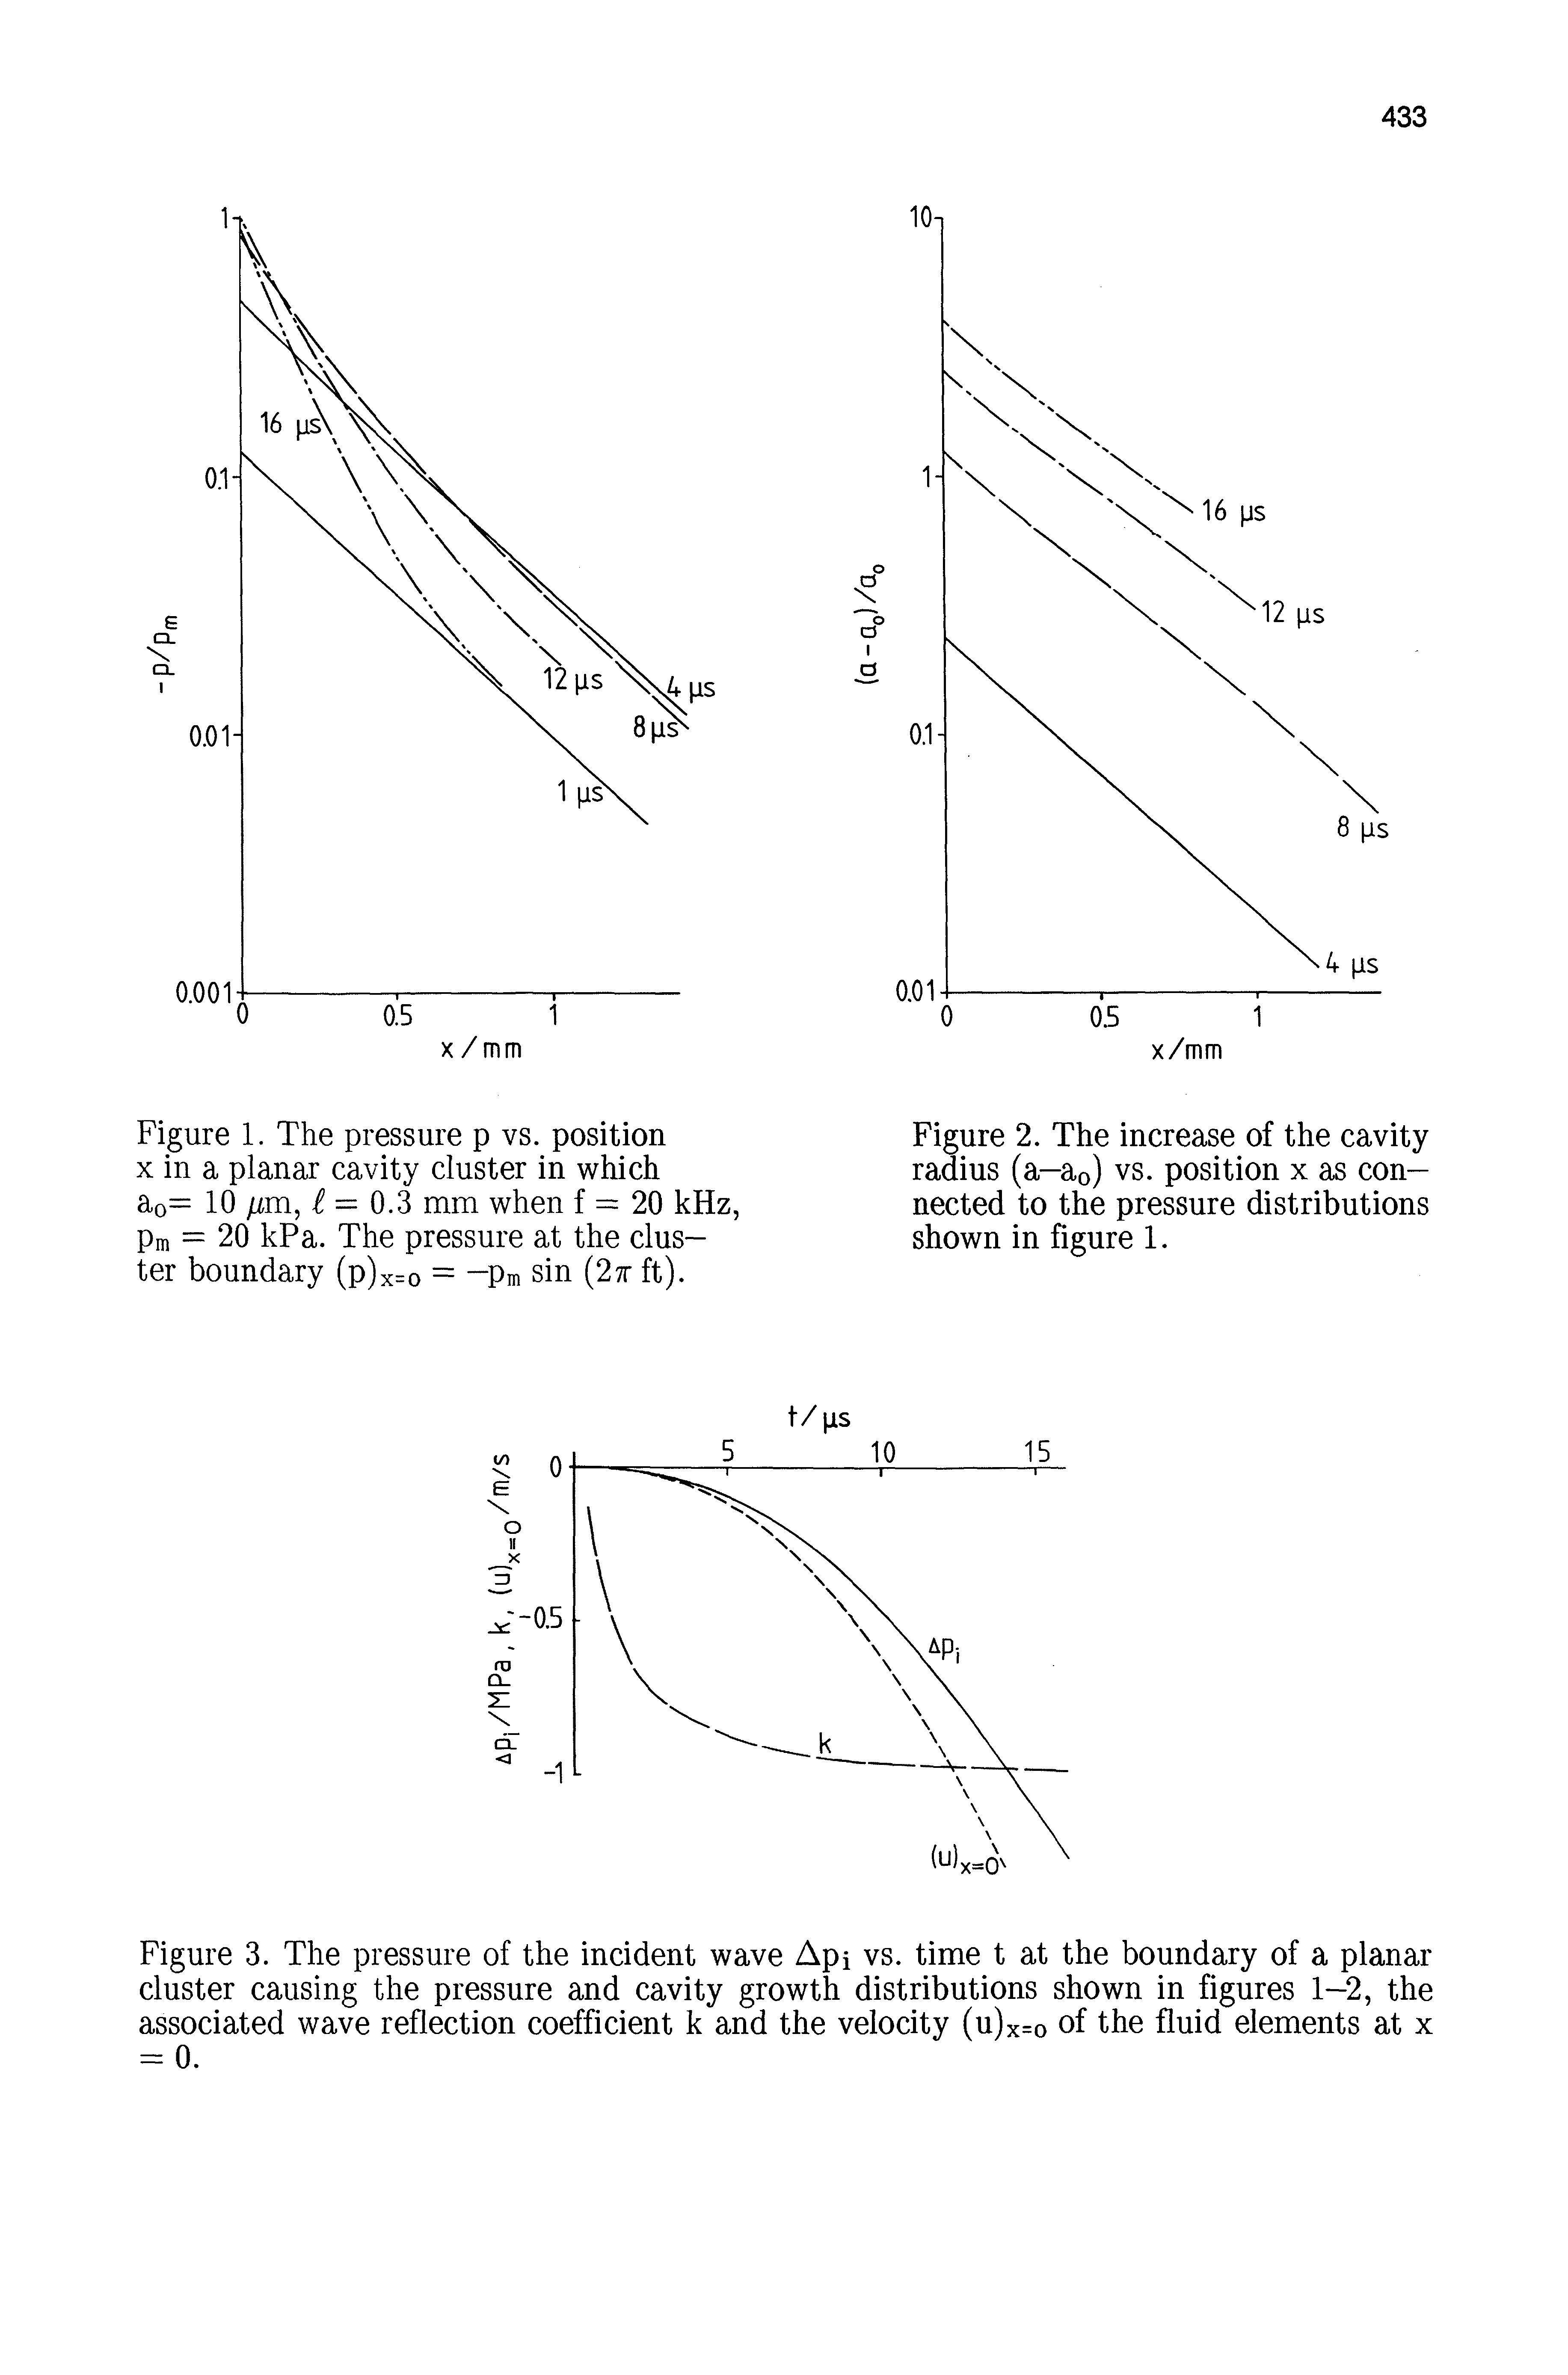 Figure 3. The pressure of the incident wave Api vs. time t at the boundary of a planar cluster causing the pressure and cavity growth distributions shown in figures 1-2, the associated wave reflection coefficient k and the velocity (u)x=o of the fluid elements at x = 0.